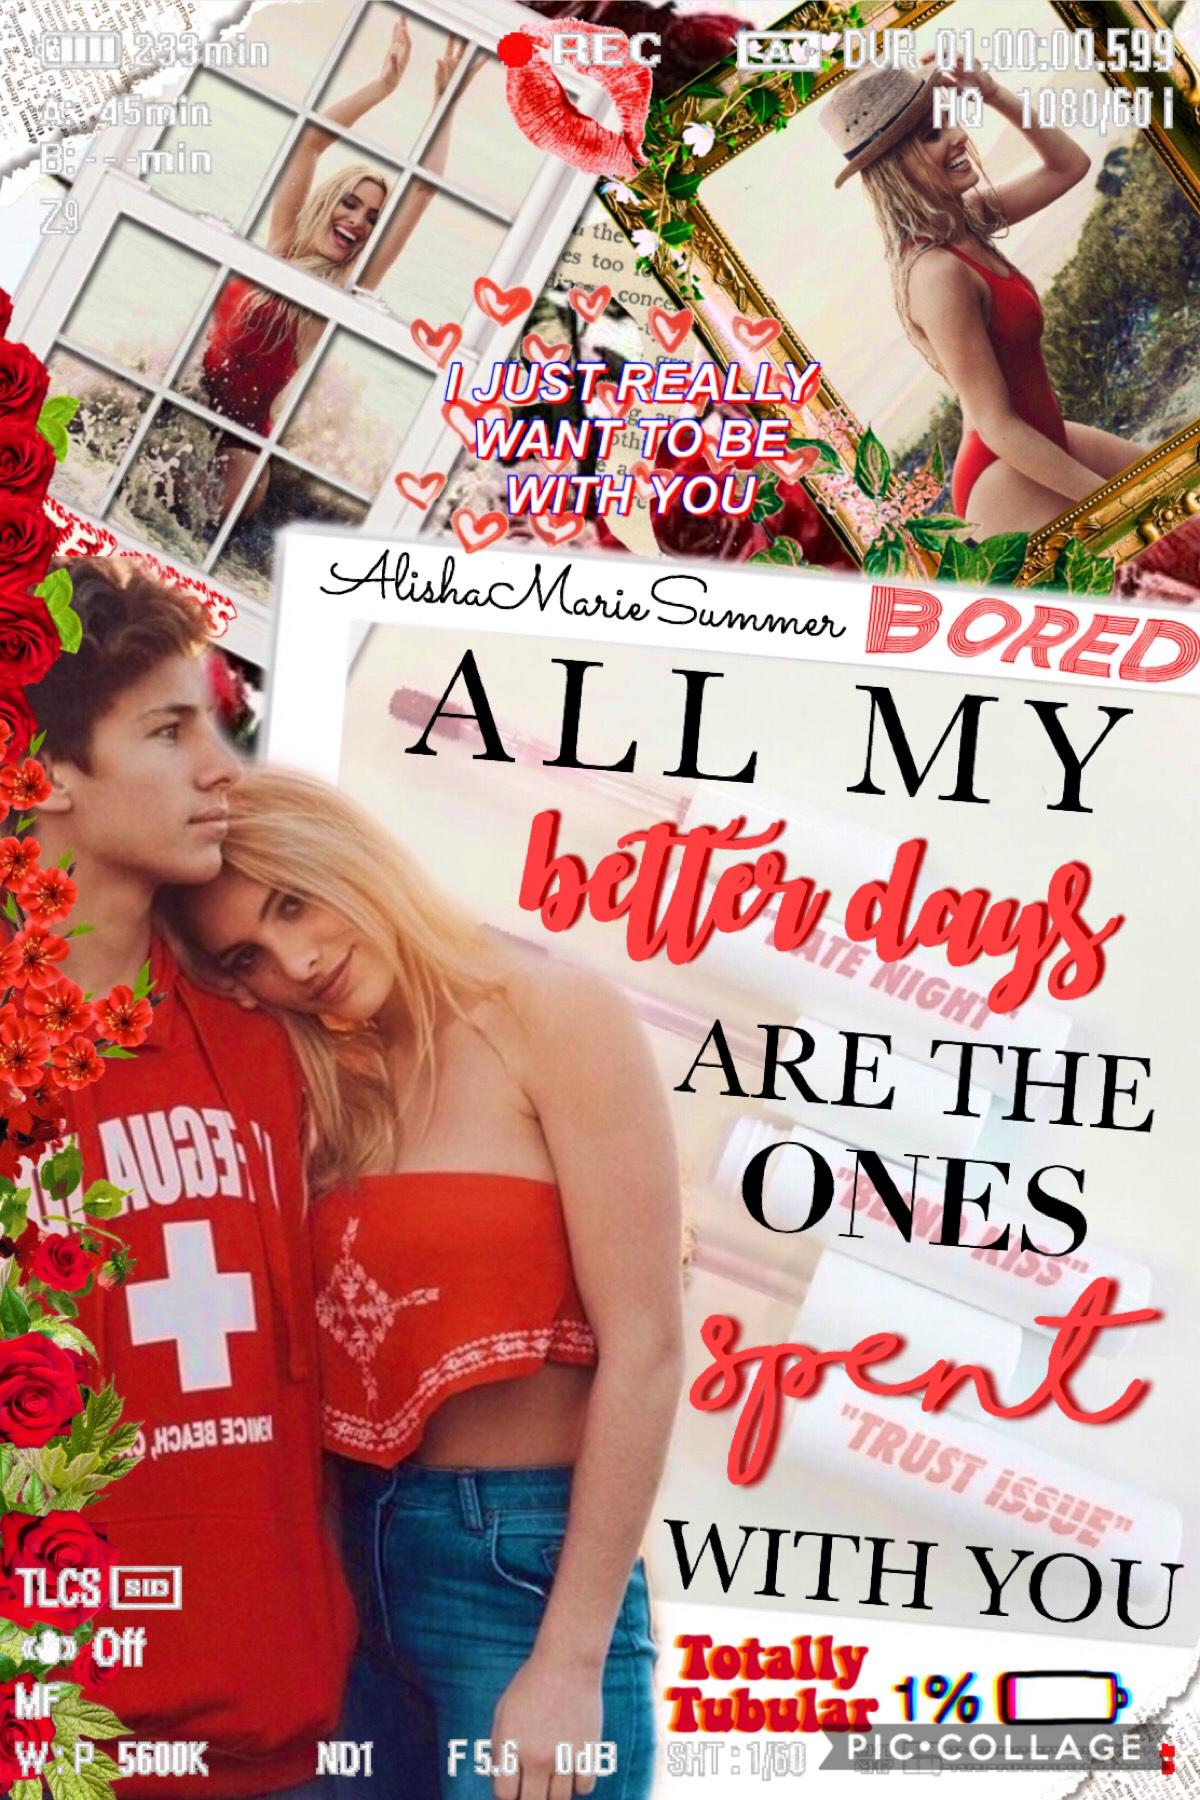 💋TaP💋
 Hey! Sorry I haven’t posted in a while. 
Here is a Lele Pons edit! I’ll probably be making edits of her! So stay tuned.

P.S. i’ll be doing something super cool with another collage on my extras account so make sure to check out that account.

QOTD